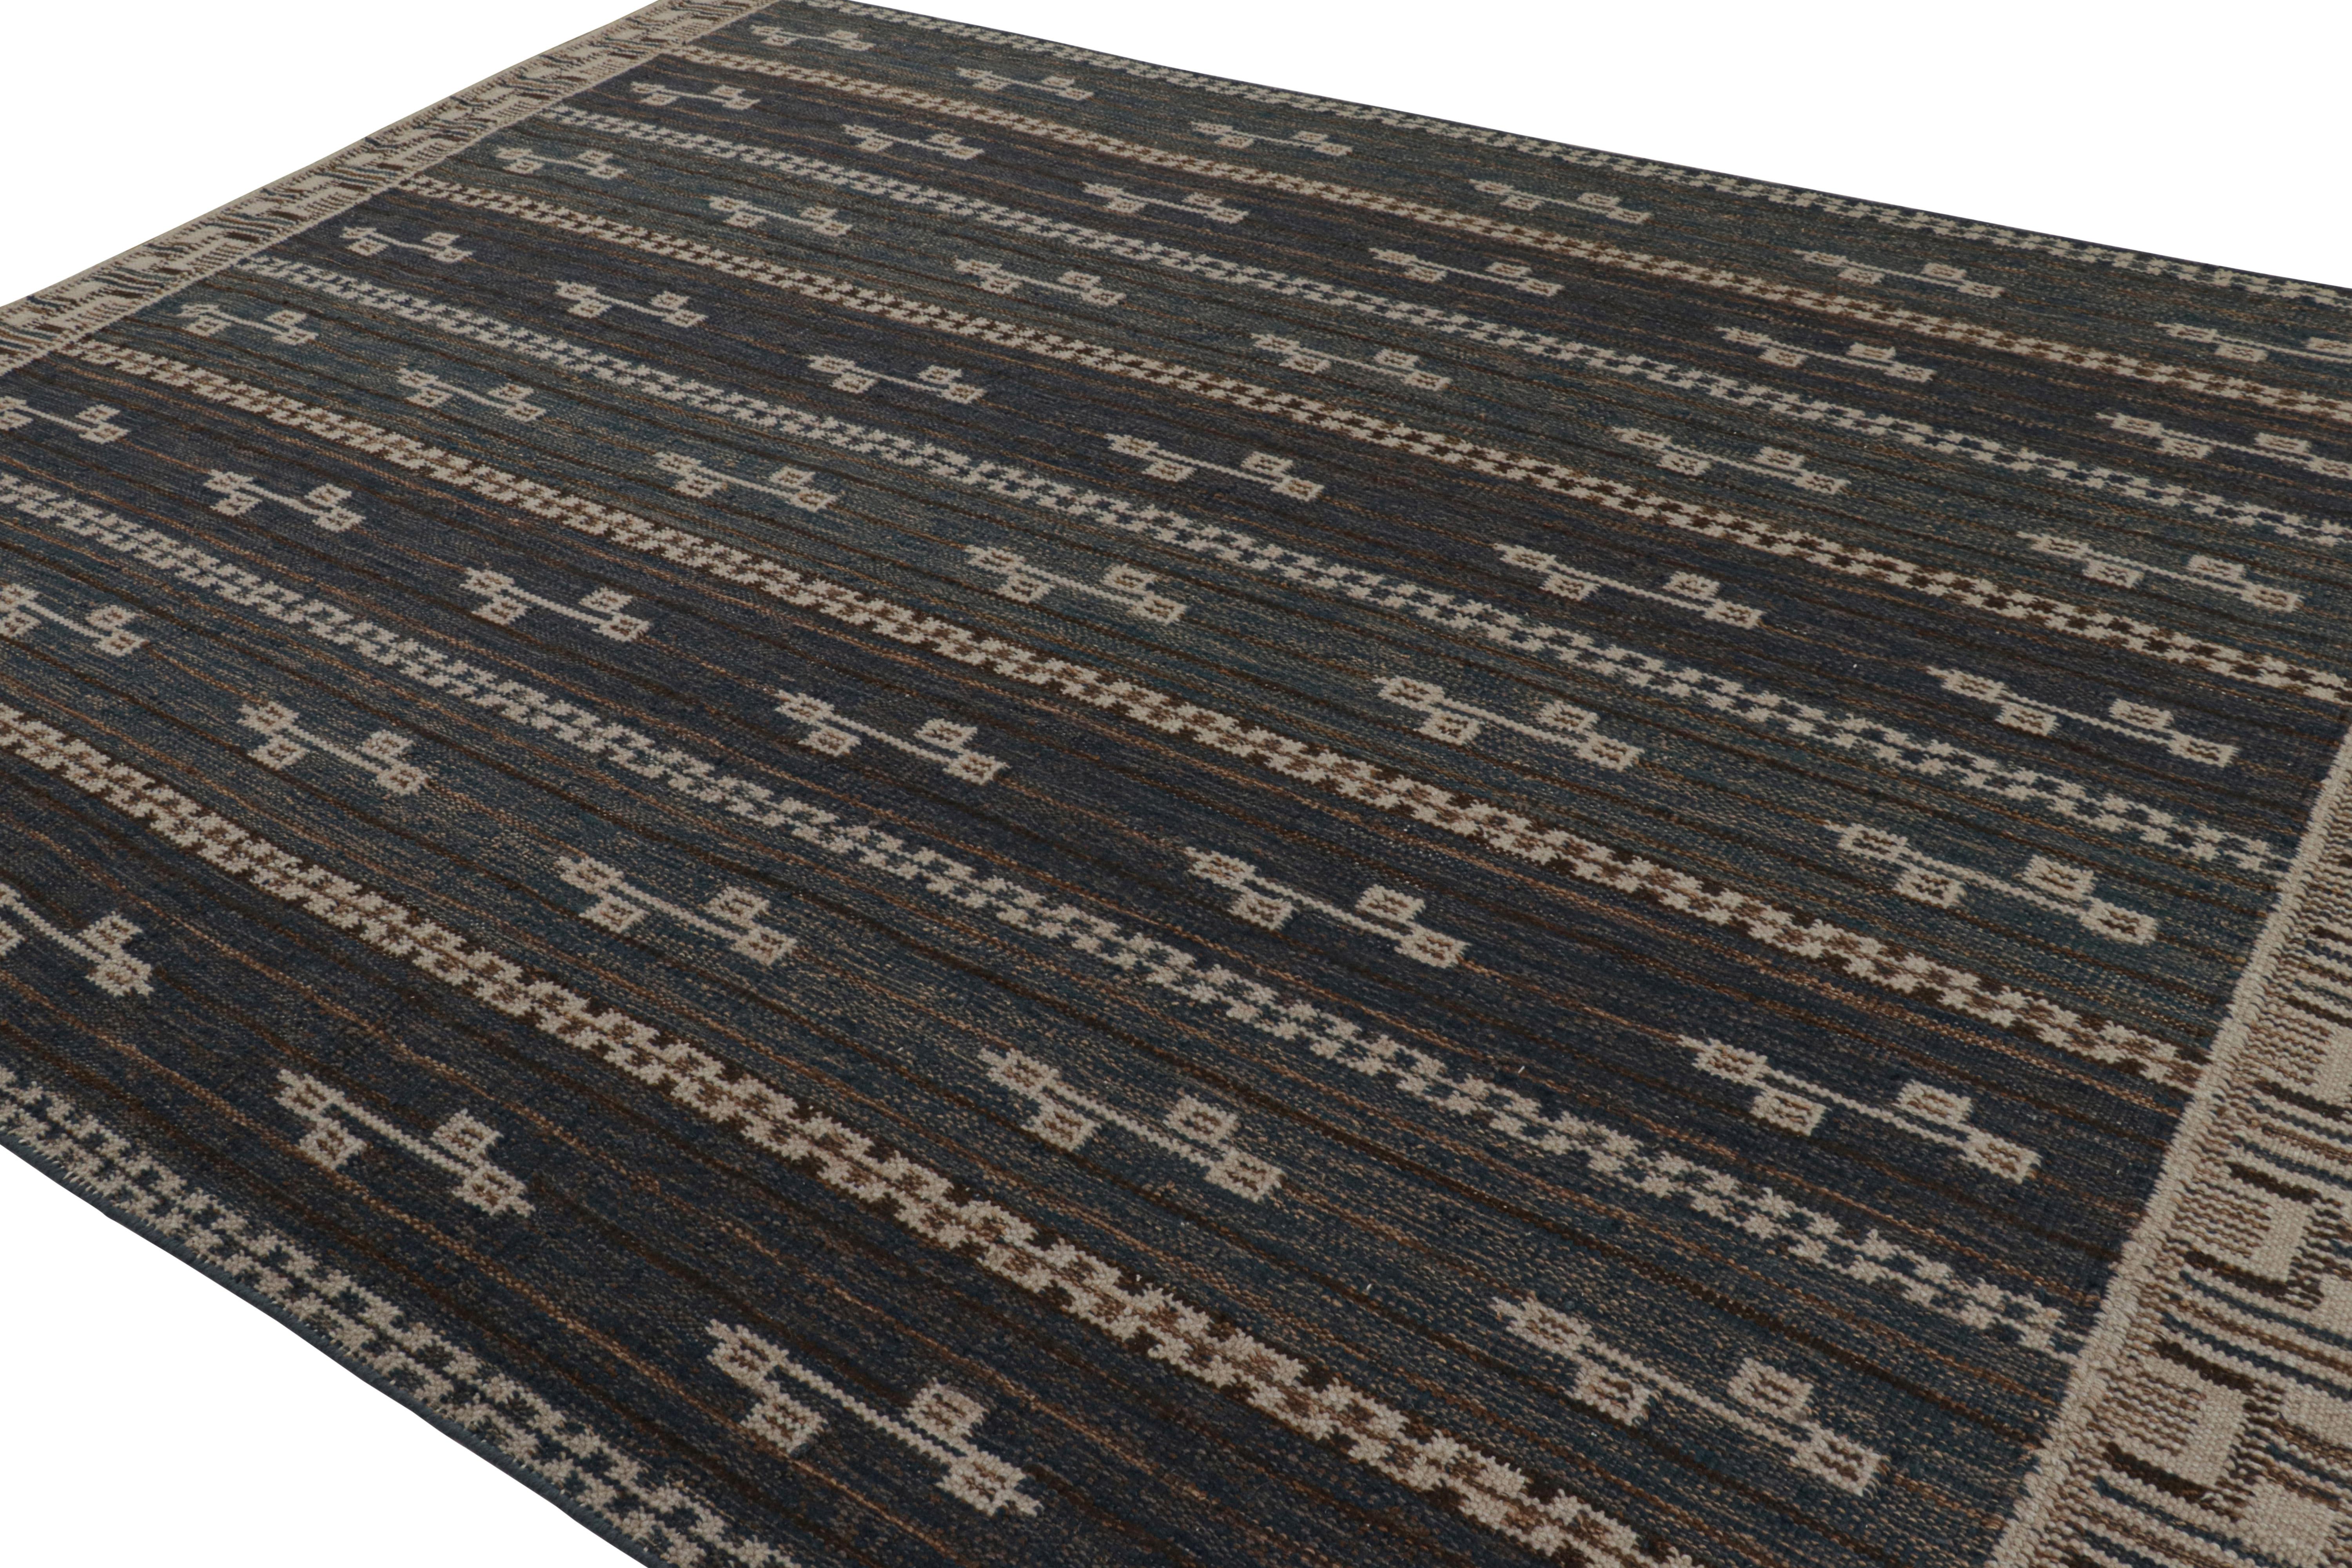 Indian Rug & Kilim’s Scandinavian Style Rug in Navy Blue with Brown Geometric Patterns For Sale